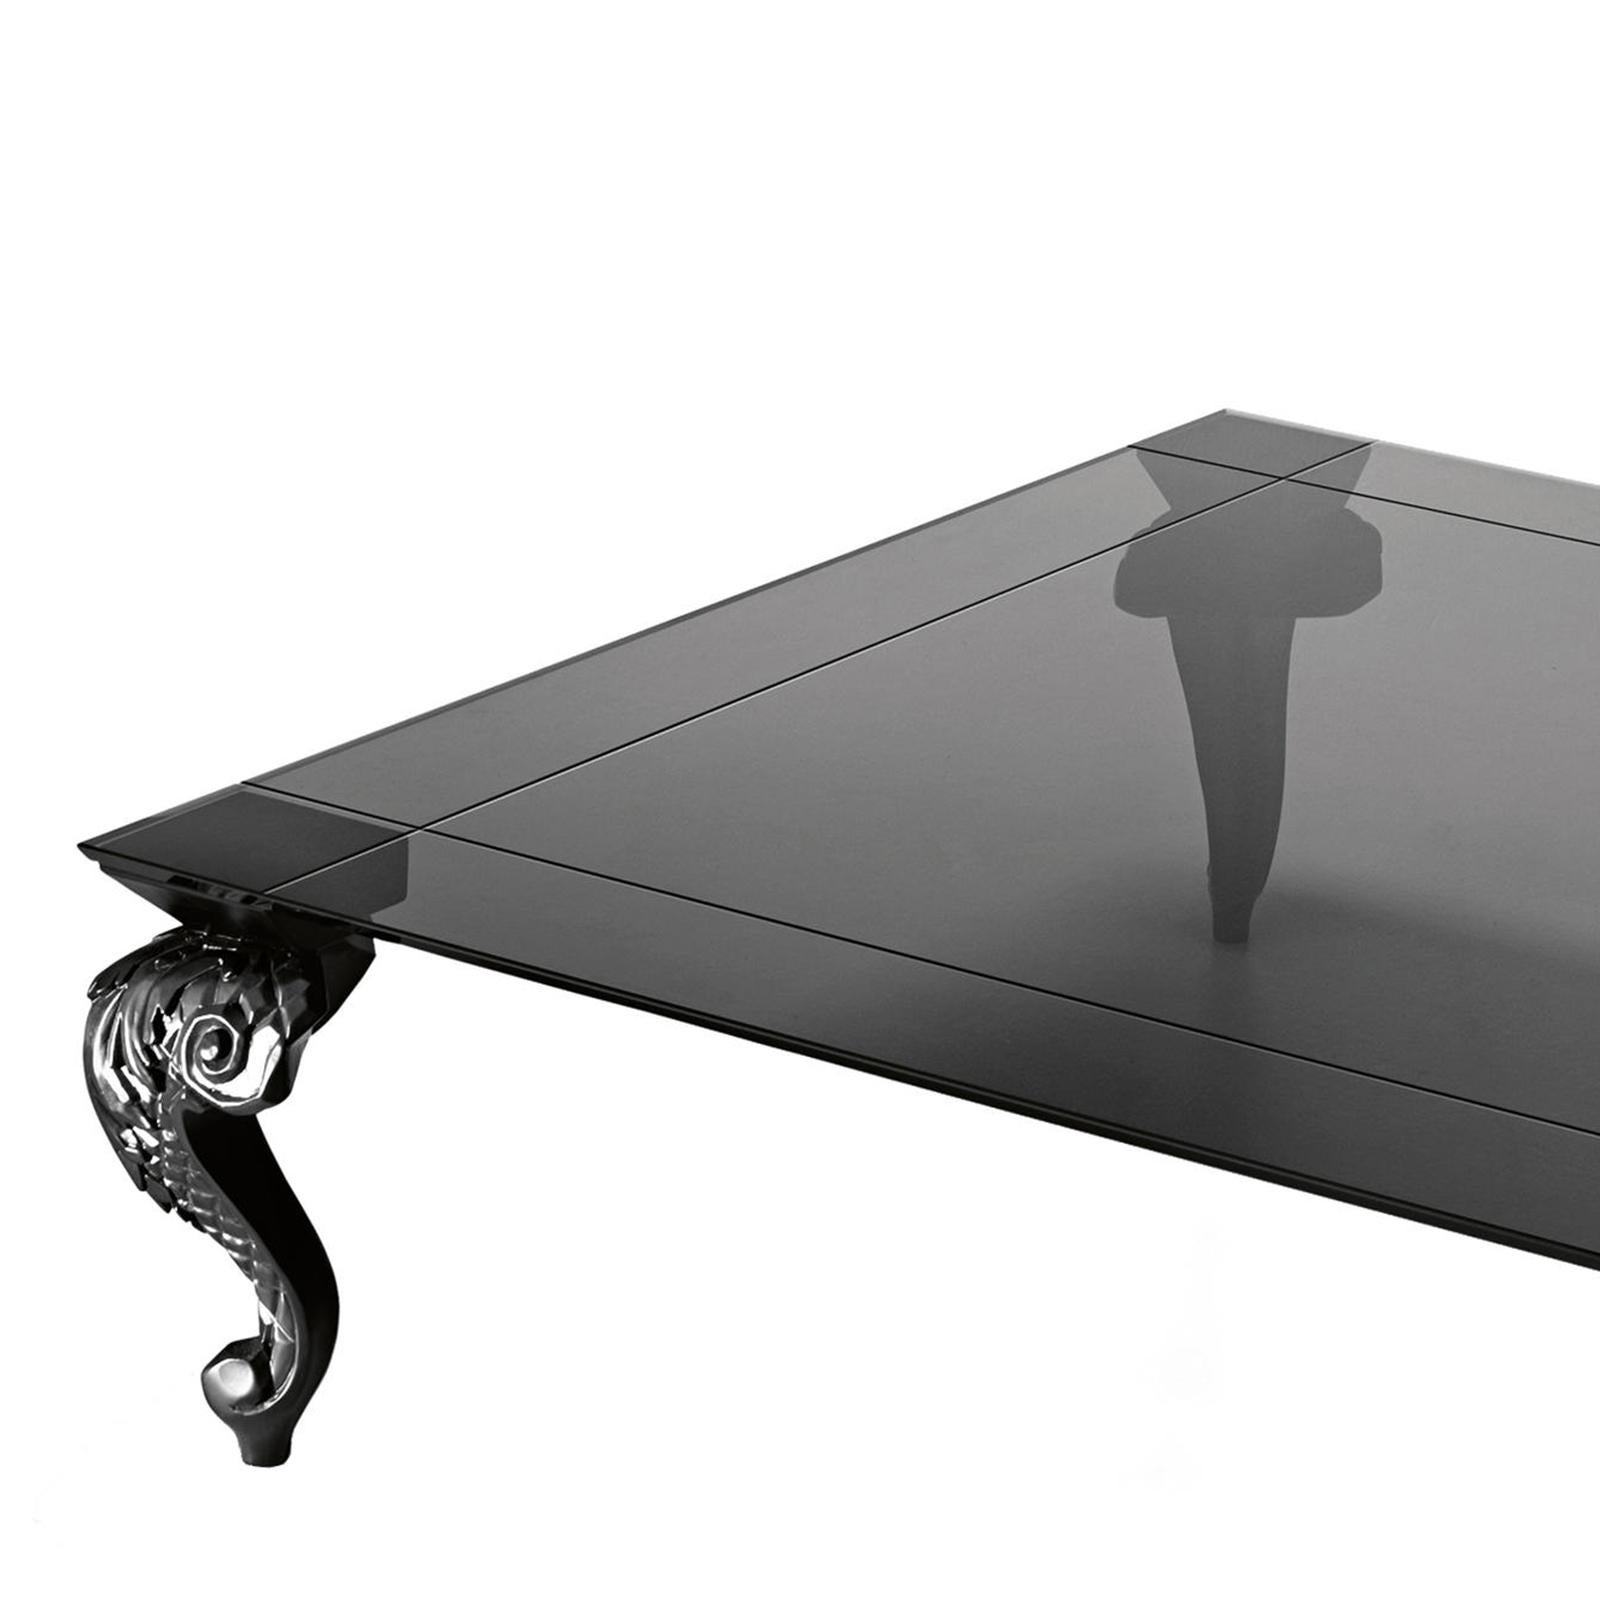 Coffee table Vega with engraved and bevelled
 top in tempered smoked glass, 12mm thickness.
With 4 casted resin feet, in black painting finish.
Also available in:
L 130x D 130 x H 40cm, price: 6900,00€
L 160x D 100x H 40cm, price: 6500,00€.